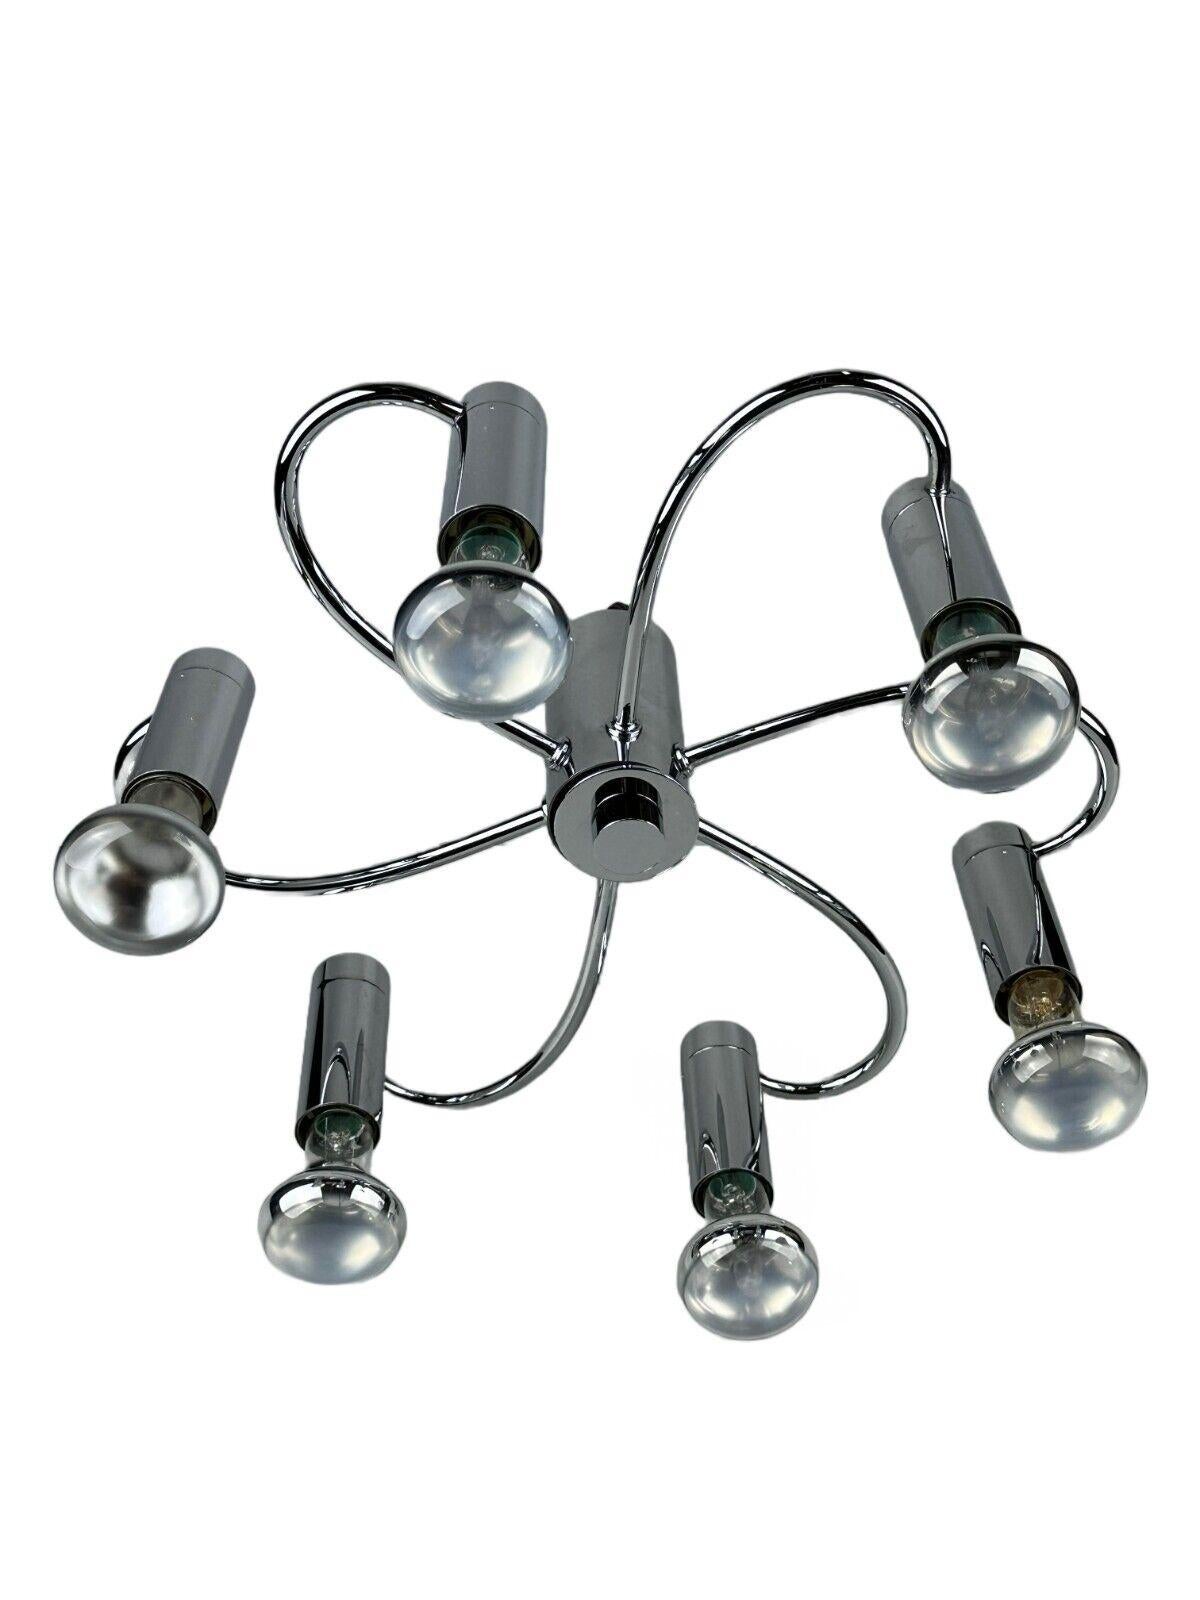 60s 70s Sputnik wall lamp or ceiling lamp by Cosack Leuchten Chrom

Object: ceiling lamp

Manufacturer: Cosack lights

Condition: good

Age: around 1960-1970

Dimensions:

Diameter = 35cm
Height = 14cm

Other notes:

6x E14 socket

The pictures